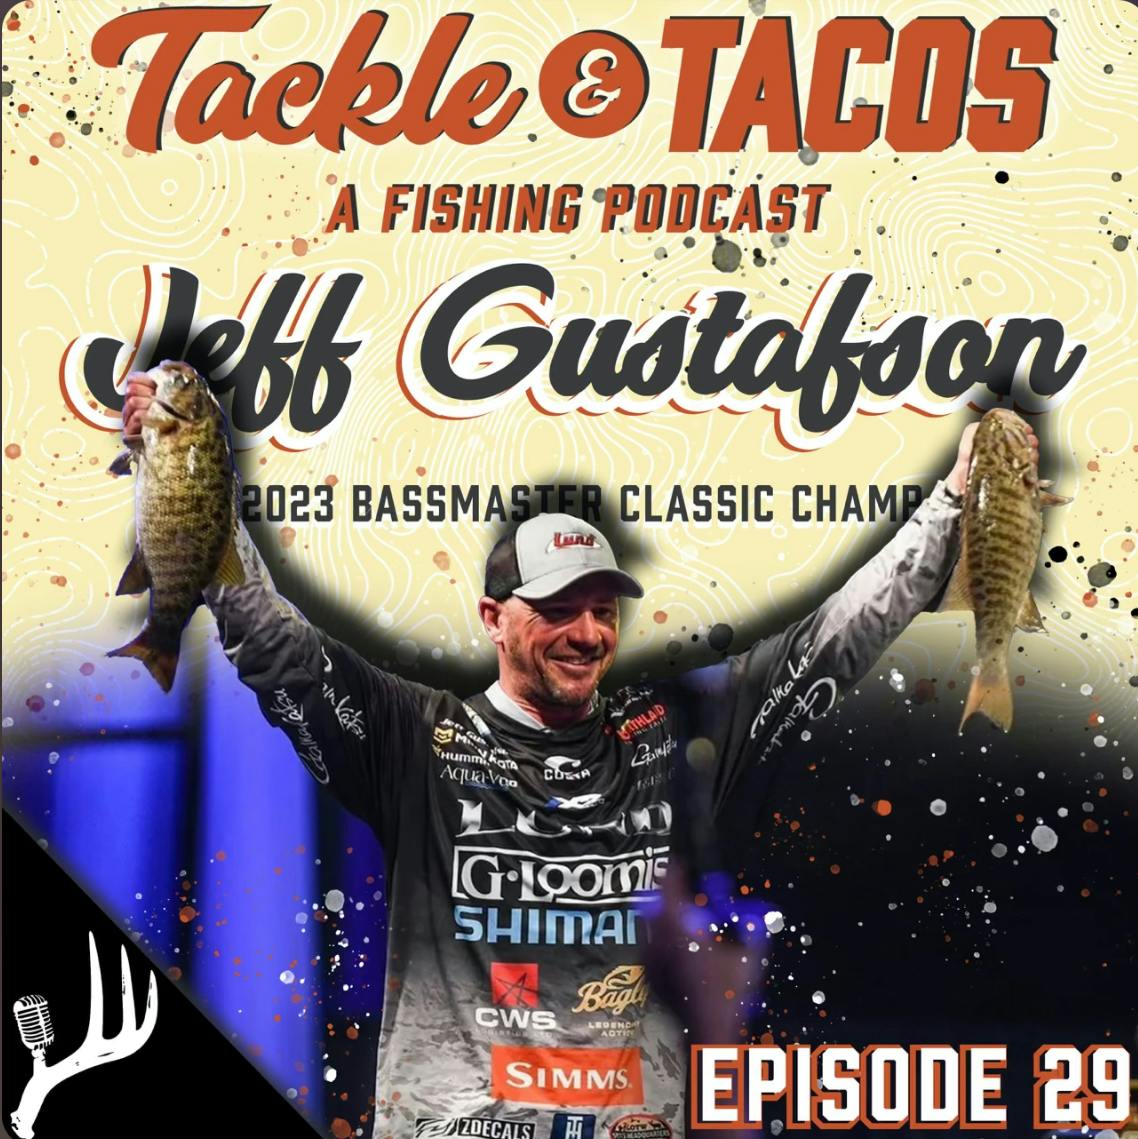 Jeff ”Gussy” Gustafson - We Made a New Friend Who Happens to be a Champ! A Bassmaster Classic Champ! - Tackle And Tacos